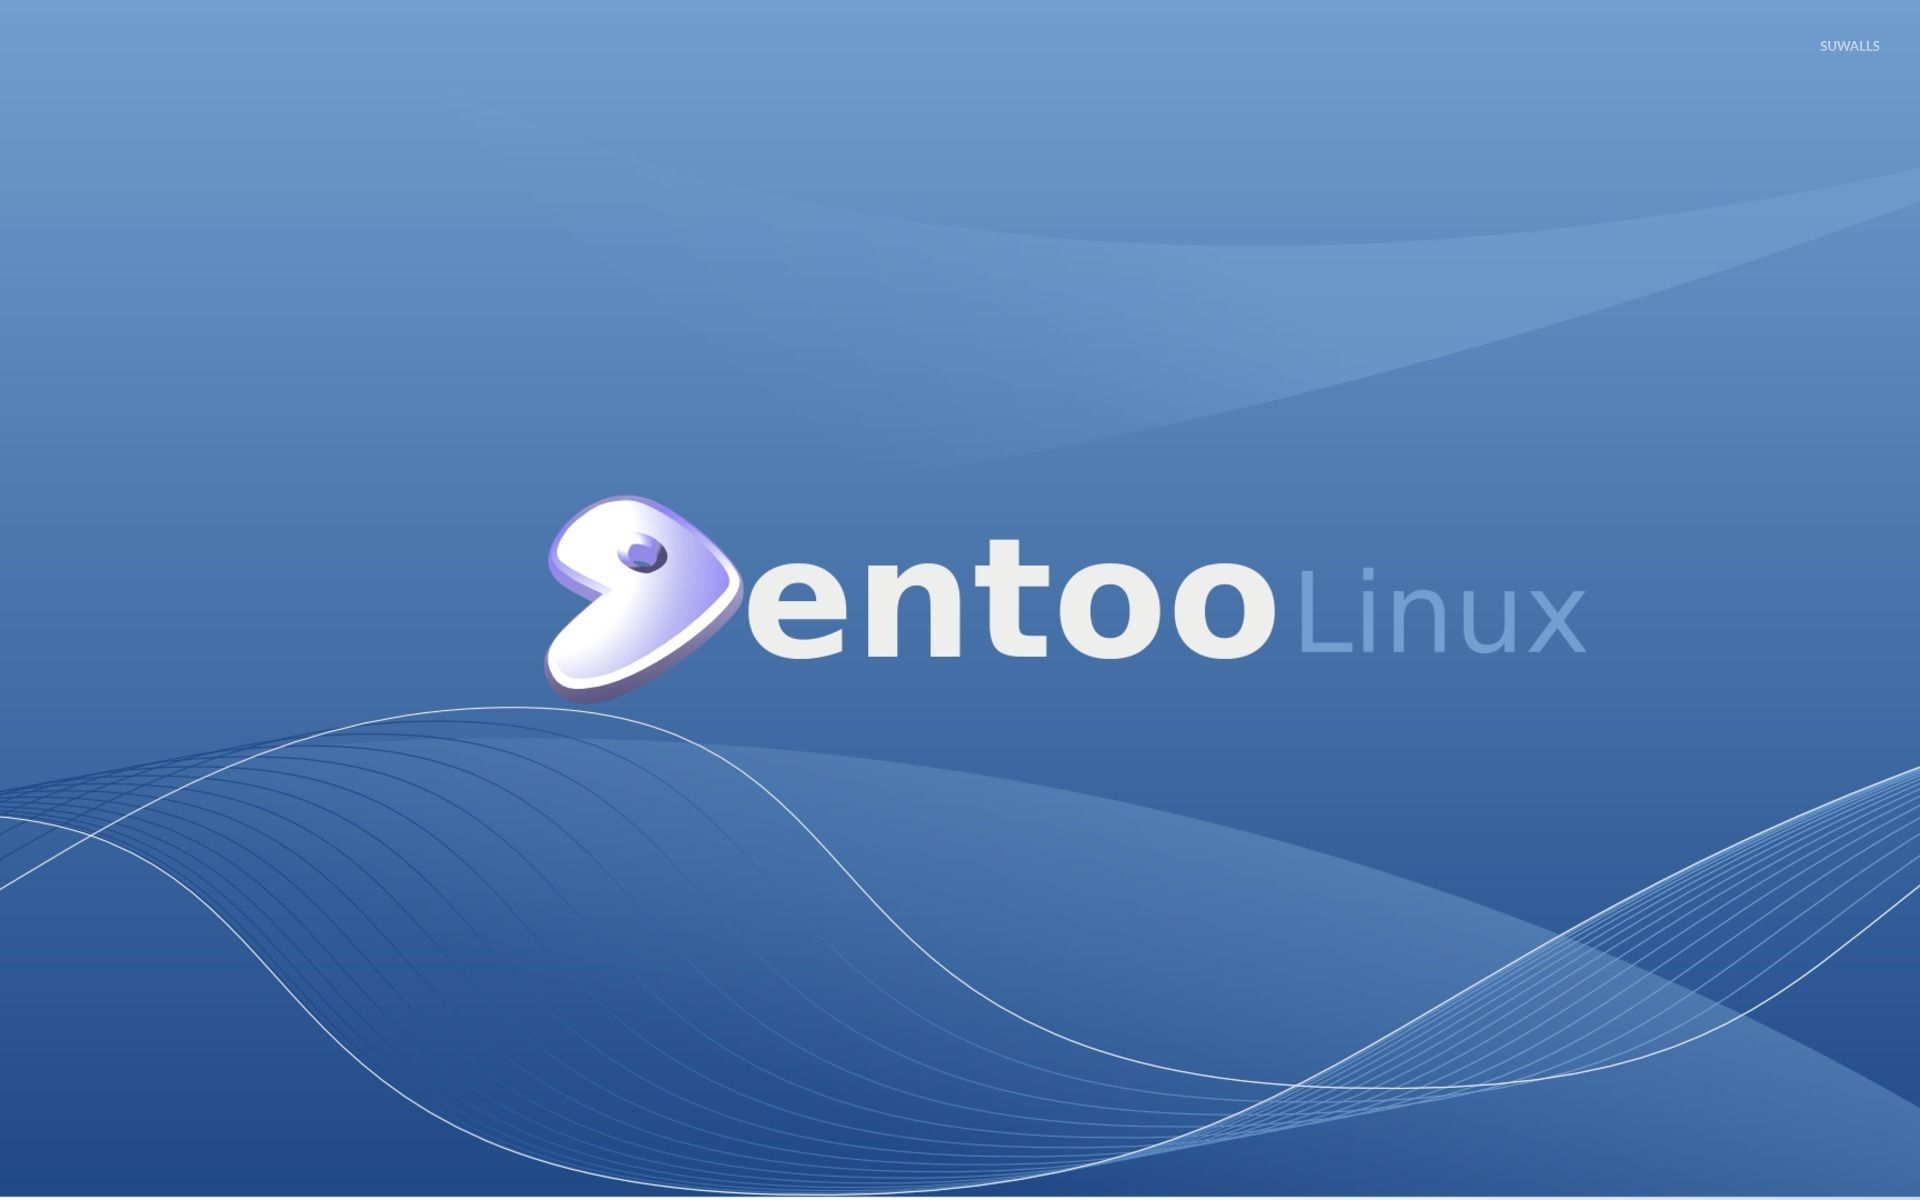 Is Gentoo Linux Any Good?